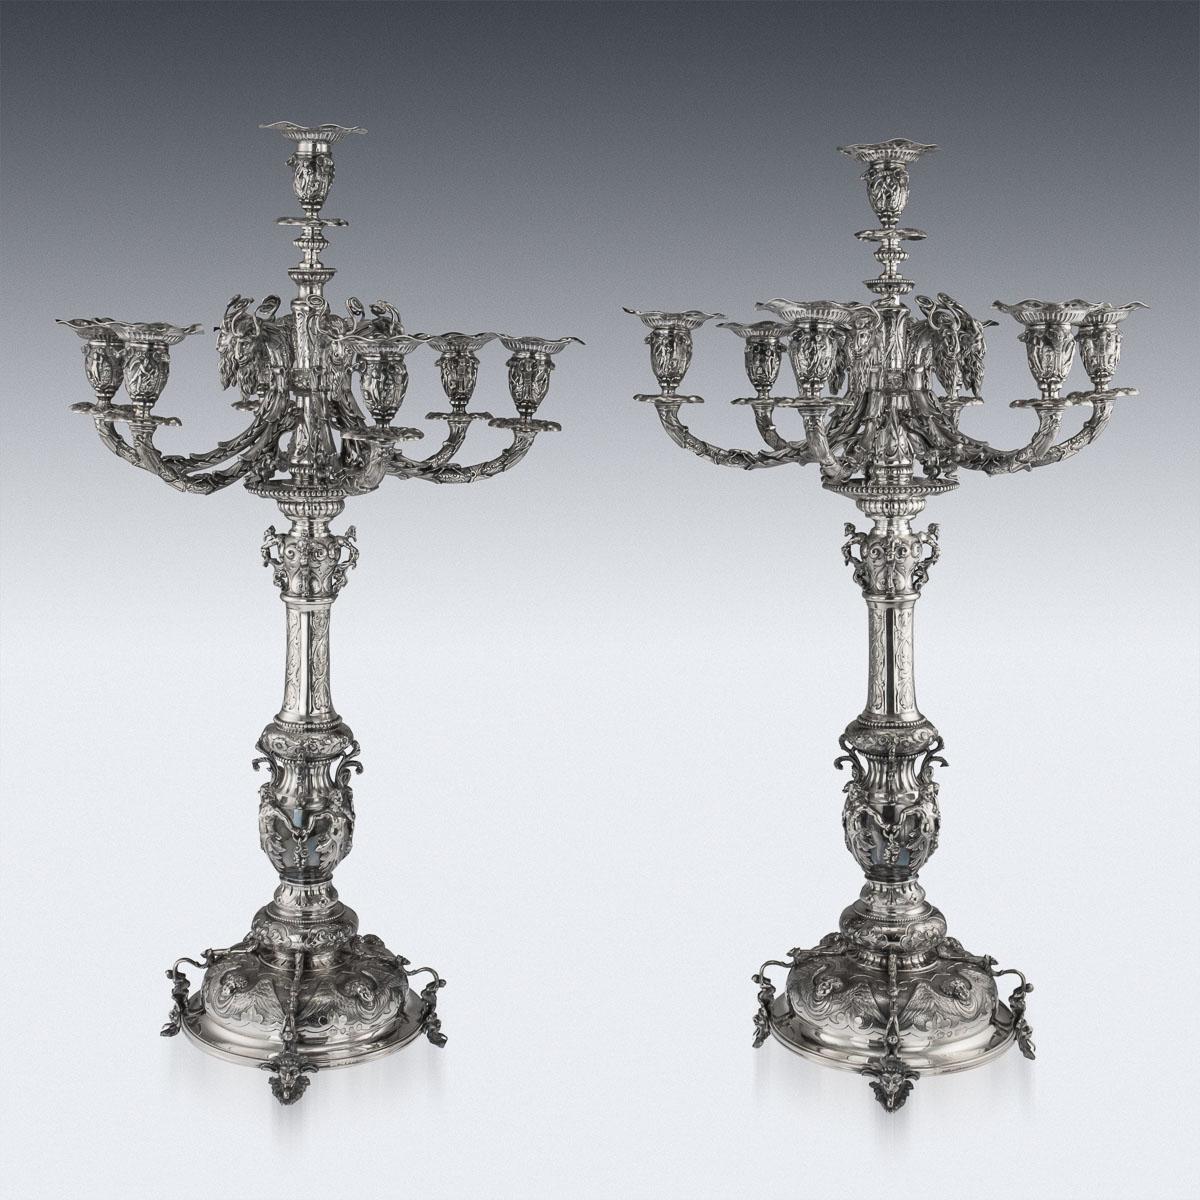 Victorian Solid Silver Set of Four Candelabras, Macrae, circa 1872-1873 In Good Condition For Sale In Royal Tunbridge Wells, Kent